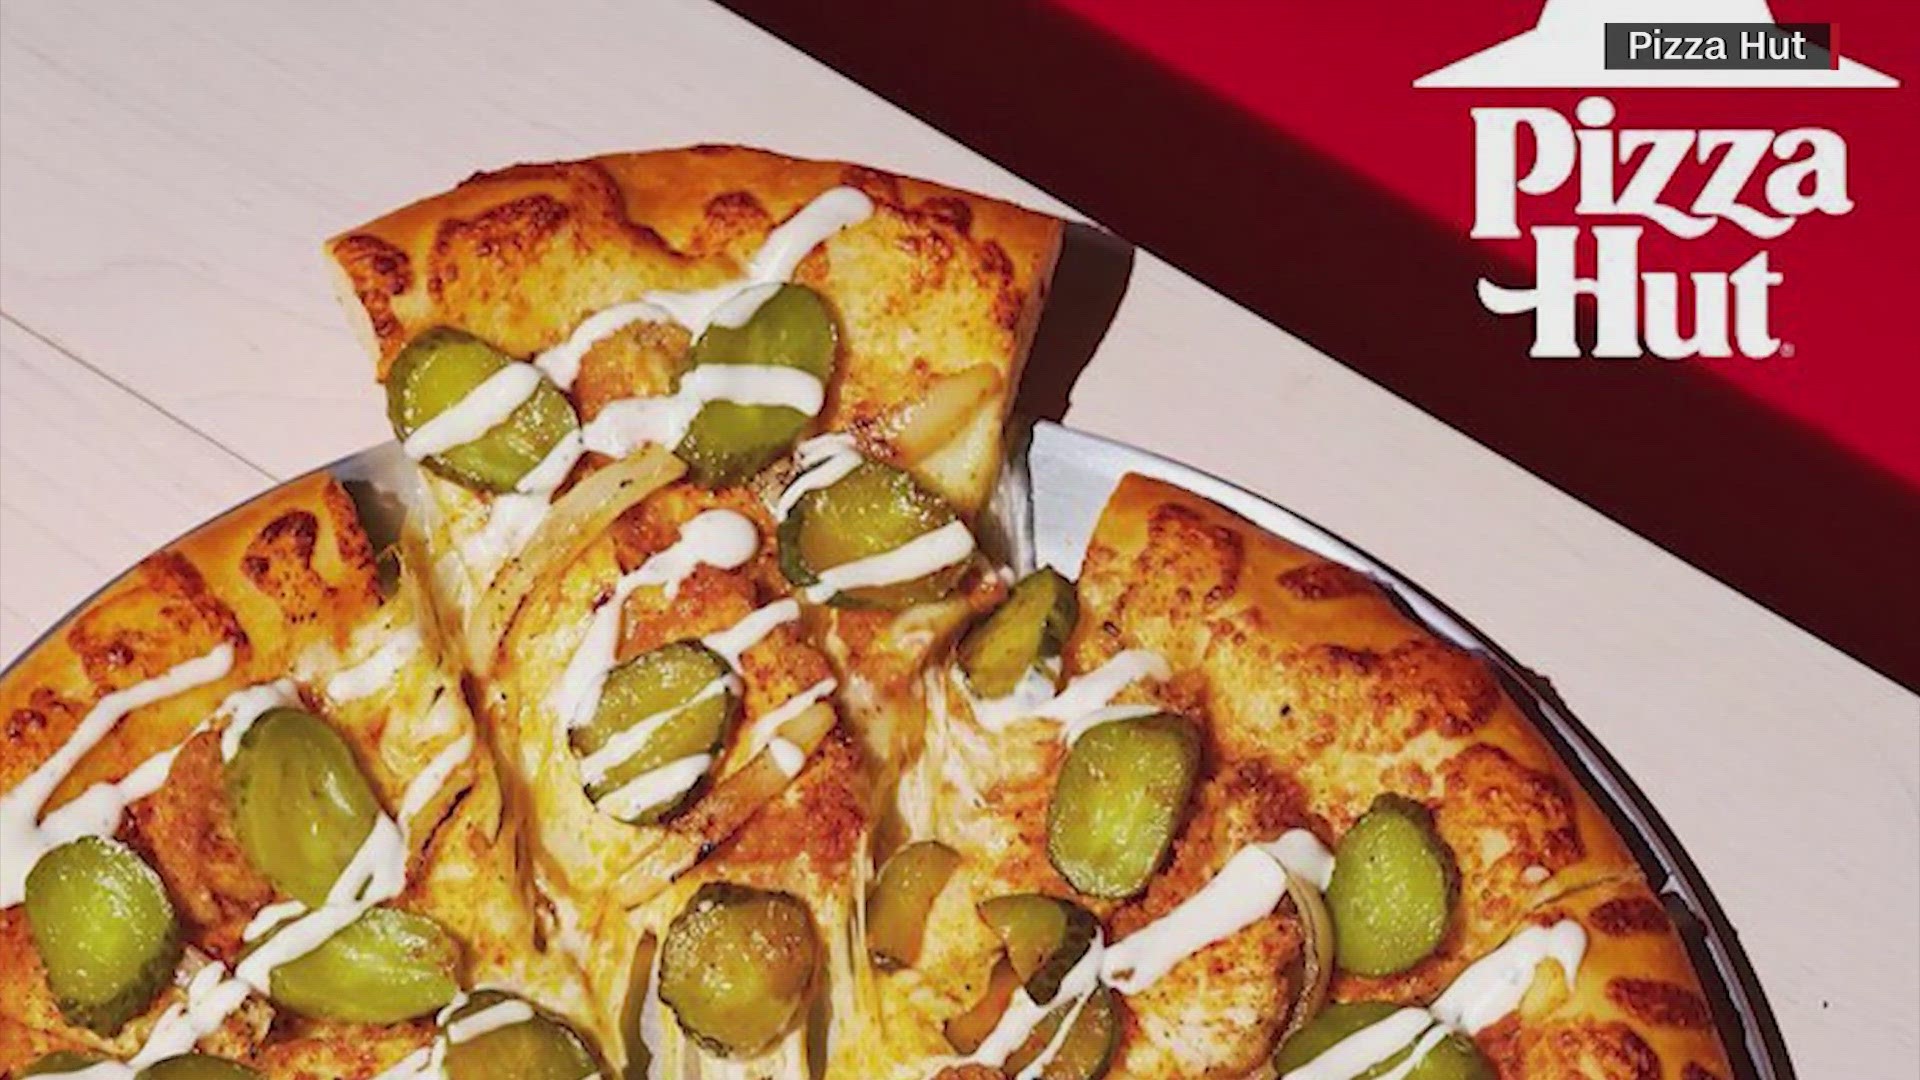 The pizza starts with a hand-tossed crust, adds buttermilk Ranch, cheese, crispy and spicy breaded chicken breast, onions and pickles. That's the good news.